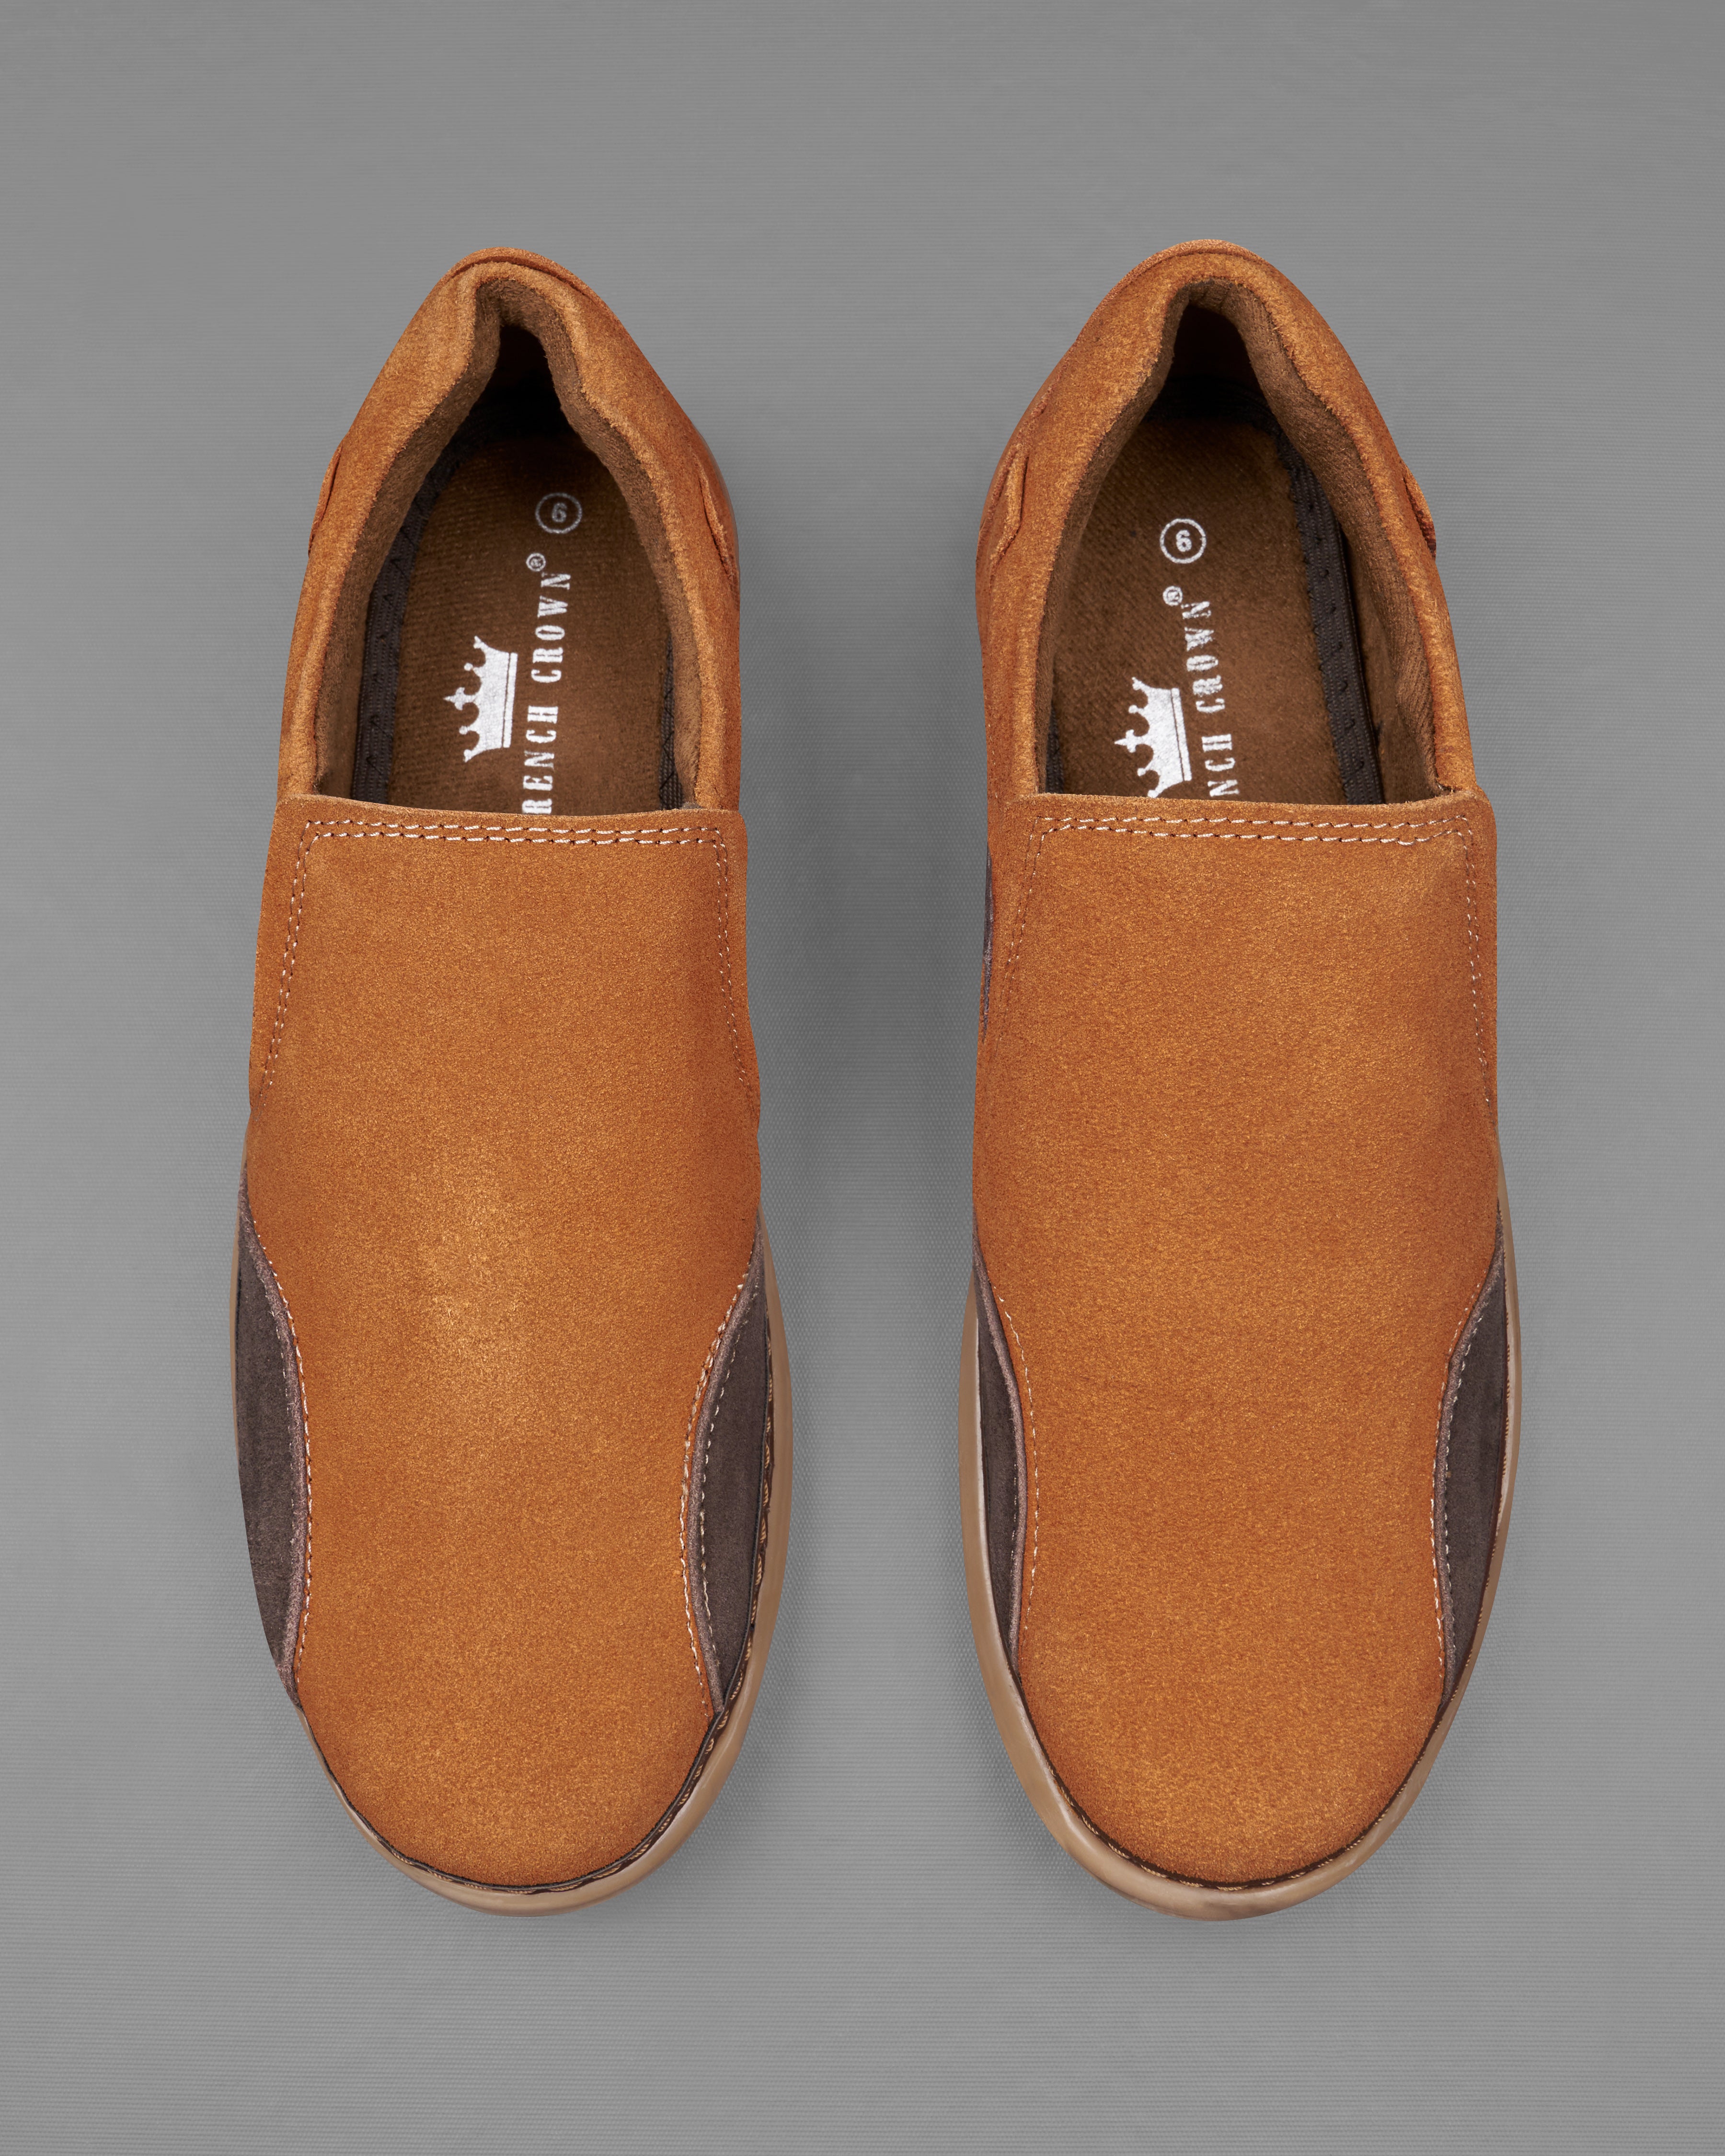 Cinnamon Brown Slip On Suede leather Shoes FT079-6, FT079-7, FT079-8, FT079-9, FT079-10, FT079-11